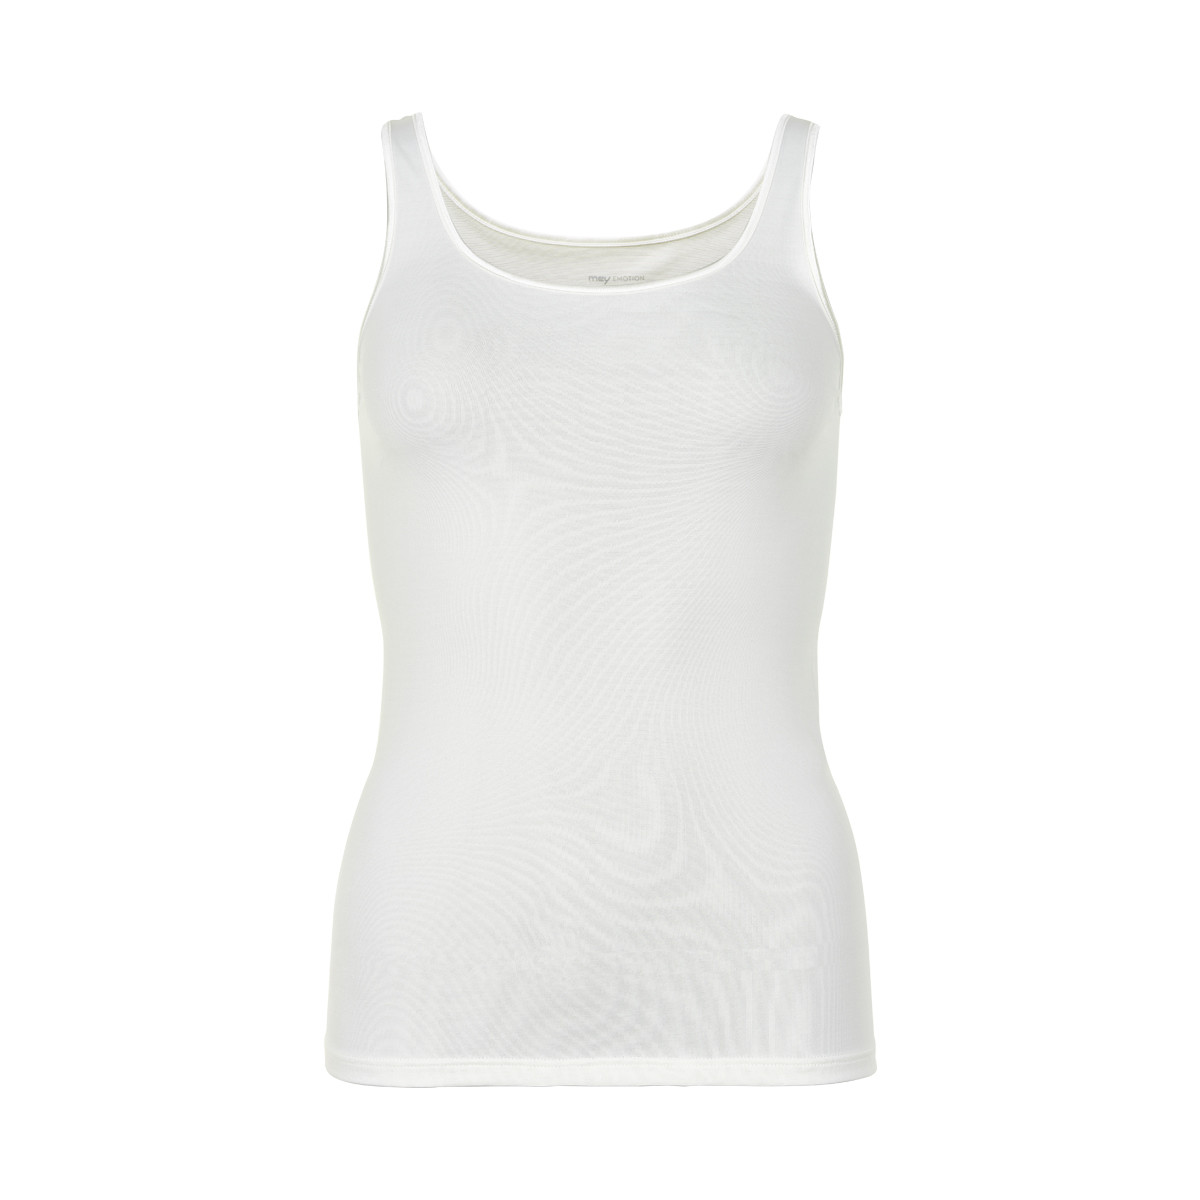 Mey Emotion Tank Top Champagne 55204 (Champagne, 48)